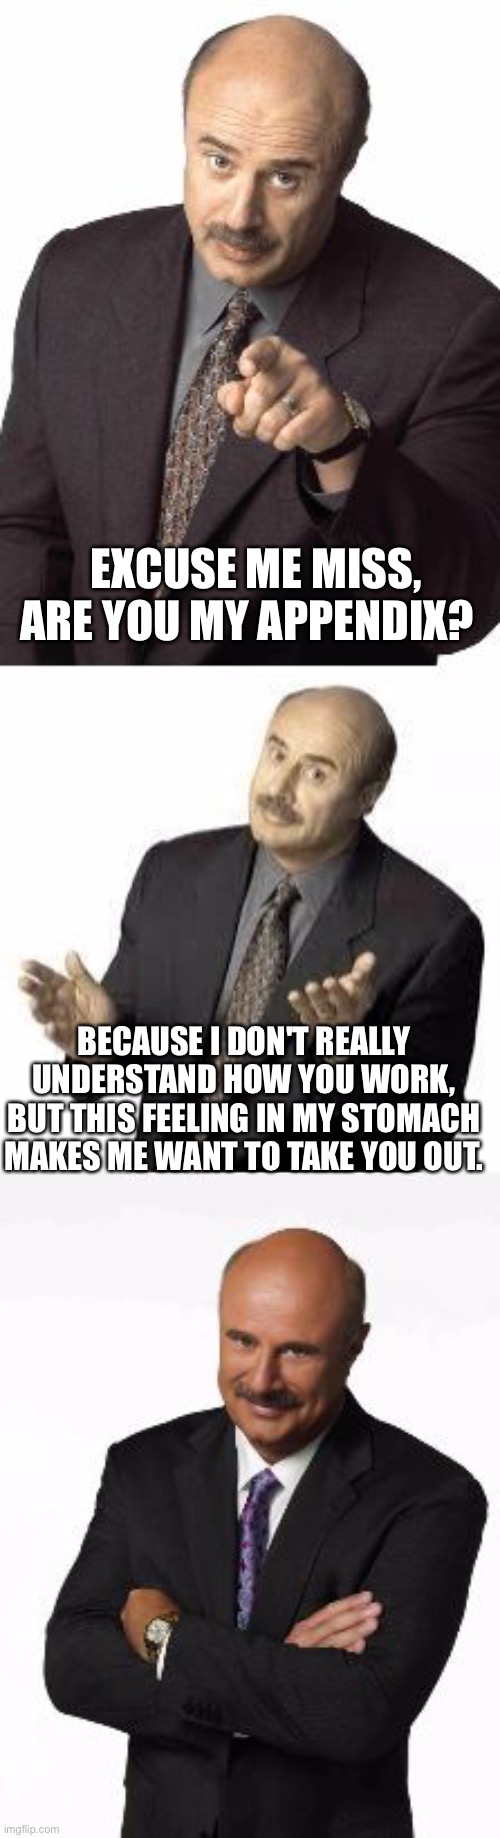 bad pun dr phil | EXCUSE ME MISS, ARE YOU MY APPENDIX? BECAUSE I DON'T REALLY UNDERSTAND HOW YOU WORK, BUT THIS FEELING IN MY STOMACH MAKES ME WANT TO TAKE YOU OUT. | image tagged in bad pun dr phil | made w/ Imgflip meme maker